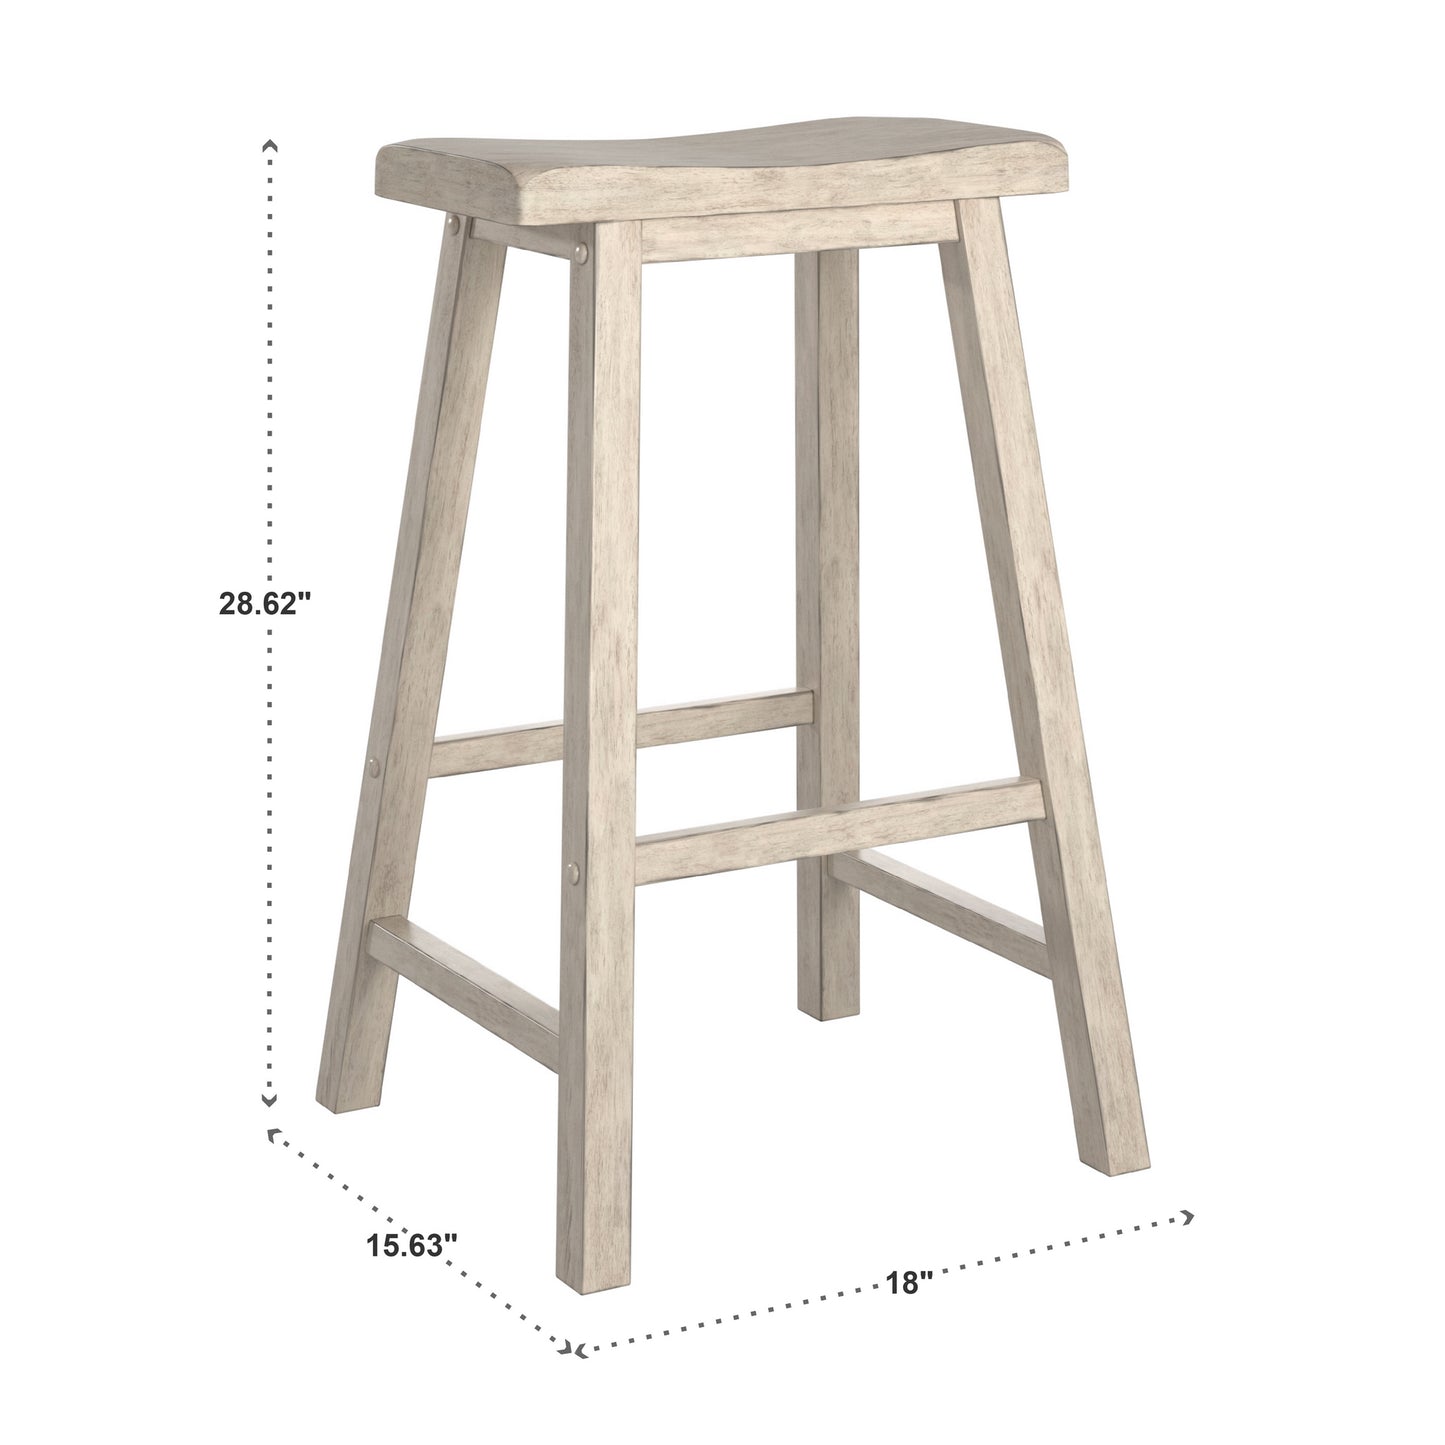 Saddle Seat 29-inch Bar Height Backless Stools (Set of 2) - Anique White